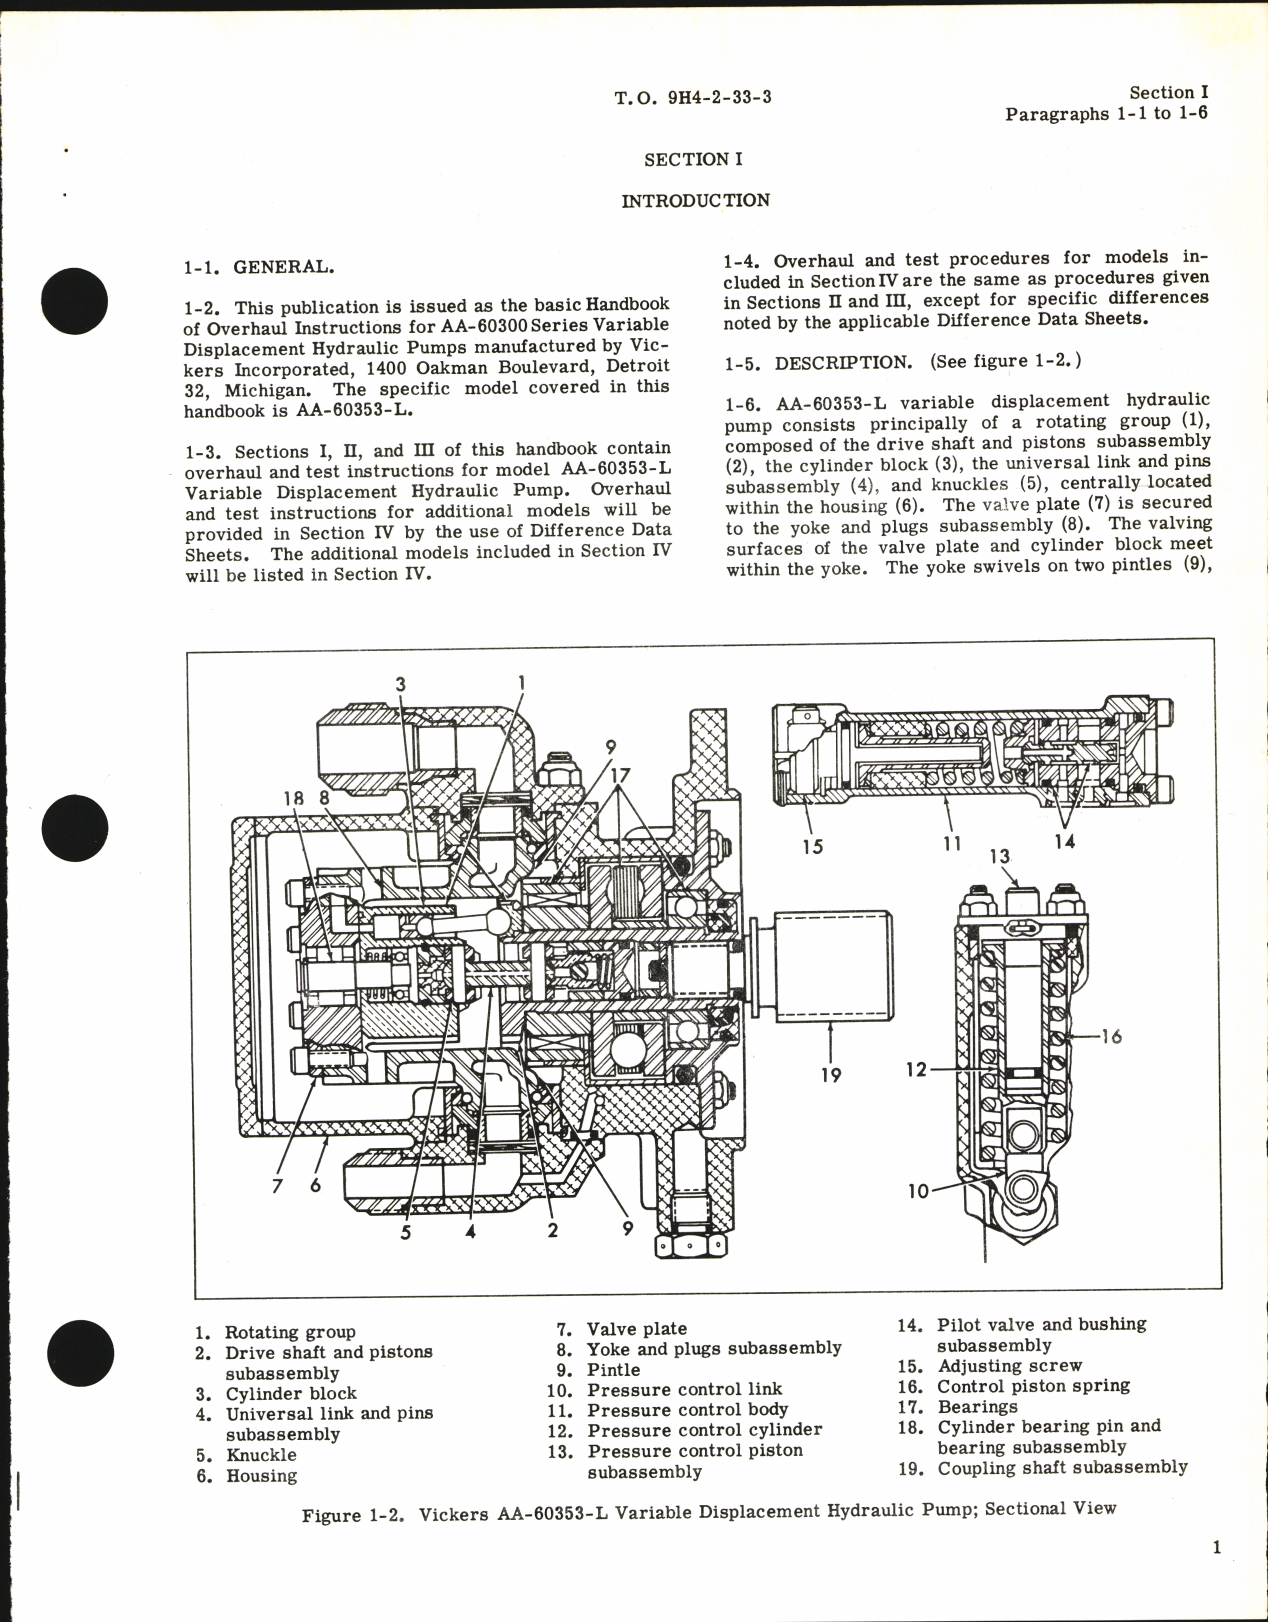 Sample page 5 from AirCorps Library document: Overhaul Instructions for Variable Displacement Hydraulic Pump AA-60300 Series